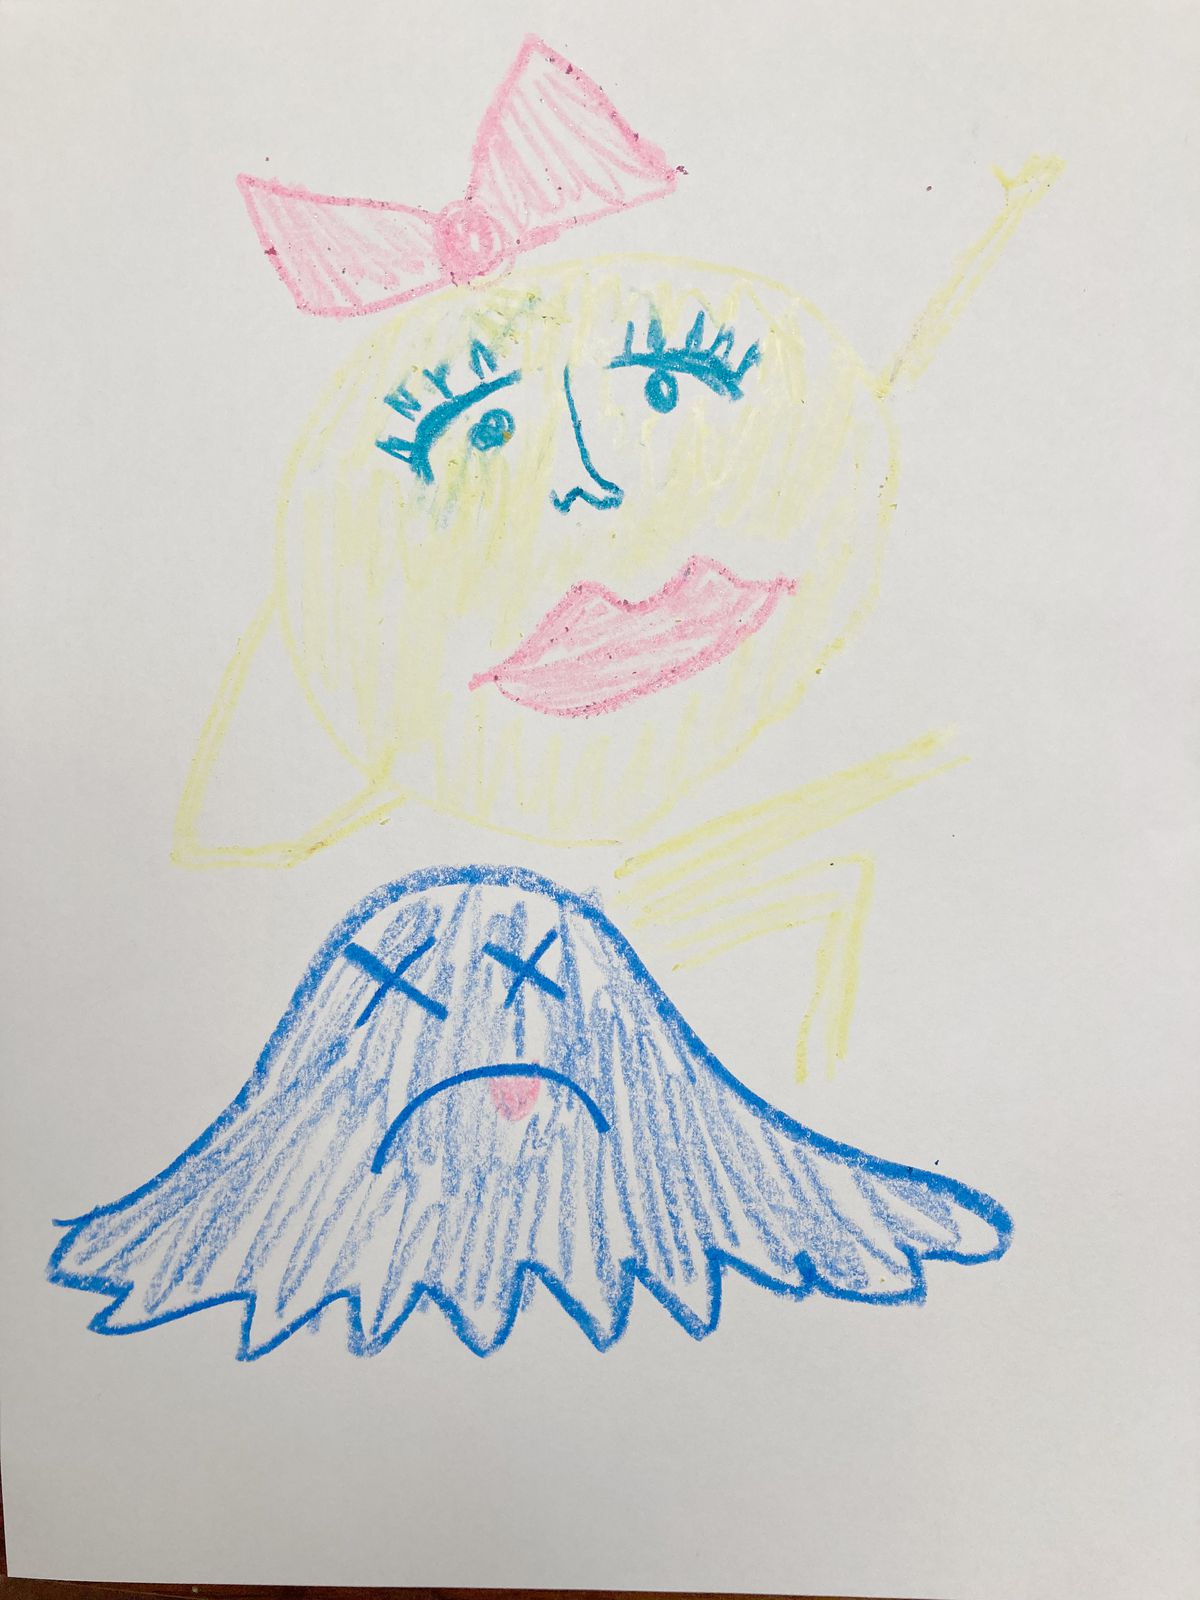 A crayon drawing of Ms. Pac-Man celebrating her victory, with the collapsed form of a blue Ghost in front of her